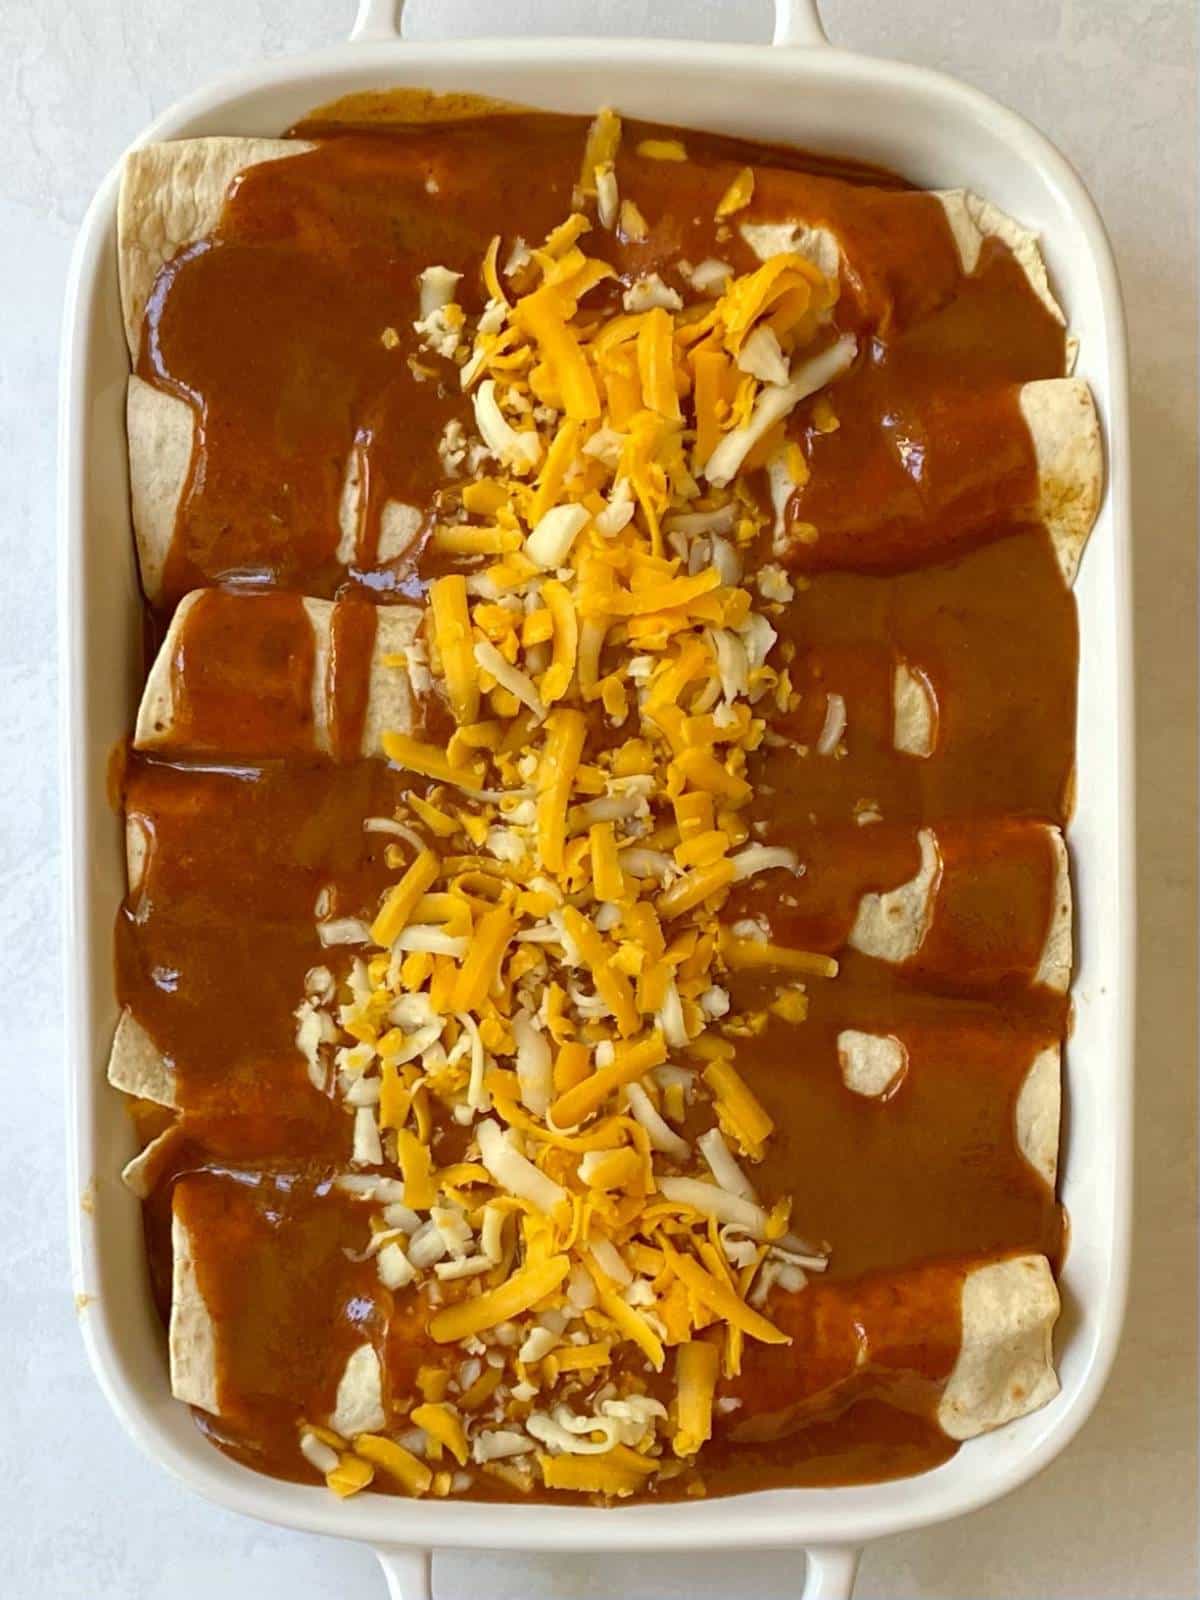 casserole dish of enchiladas covered with sauce and cheese before baking.